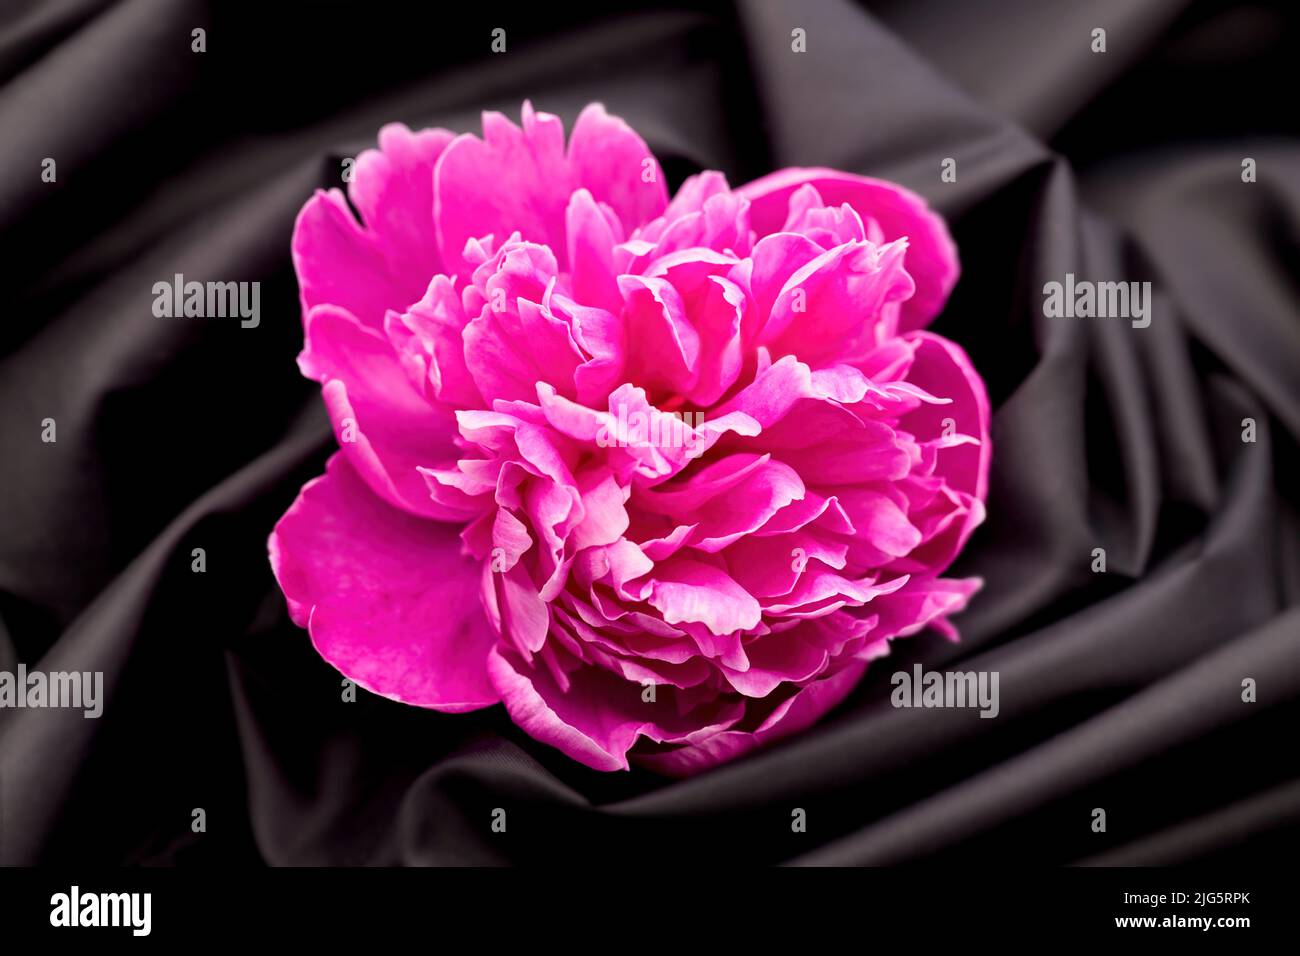 A pink peony is placed on a swirling black cloth in this studio photo. Stock Photo